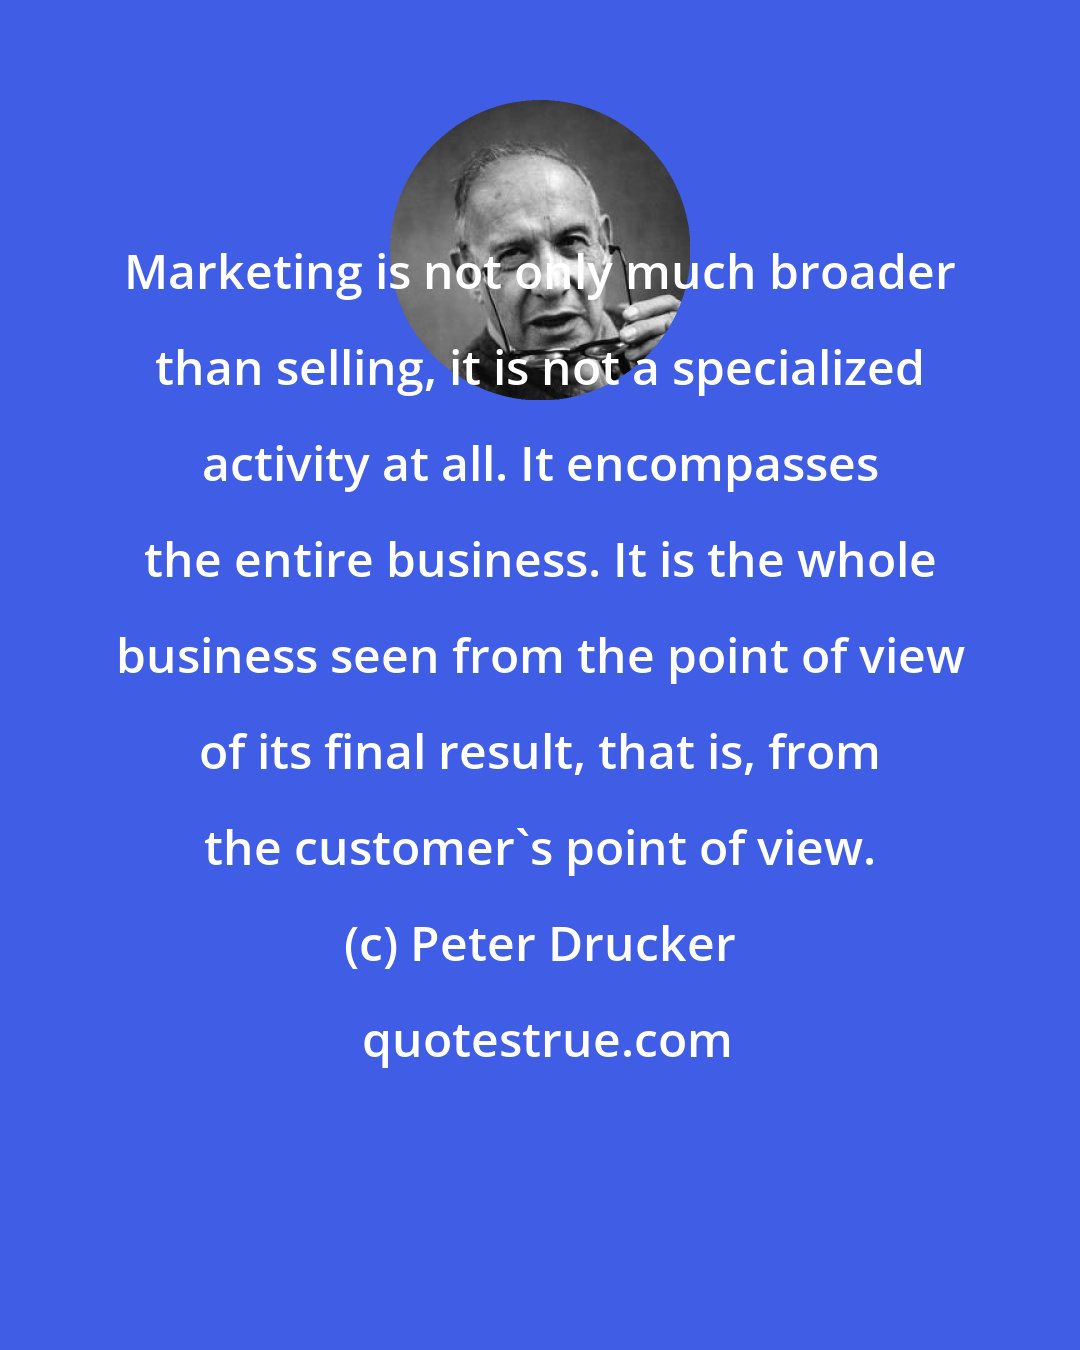 Peter Drucker: Marketing is not only much broader than selling, it is not a specialized activity at all. It encompasses the entire business. It is the whole business seen from the point of view of its final result, that is, from the customer's point of view.